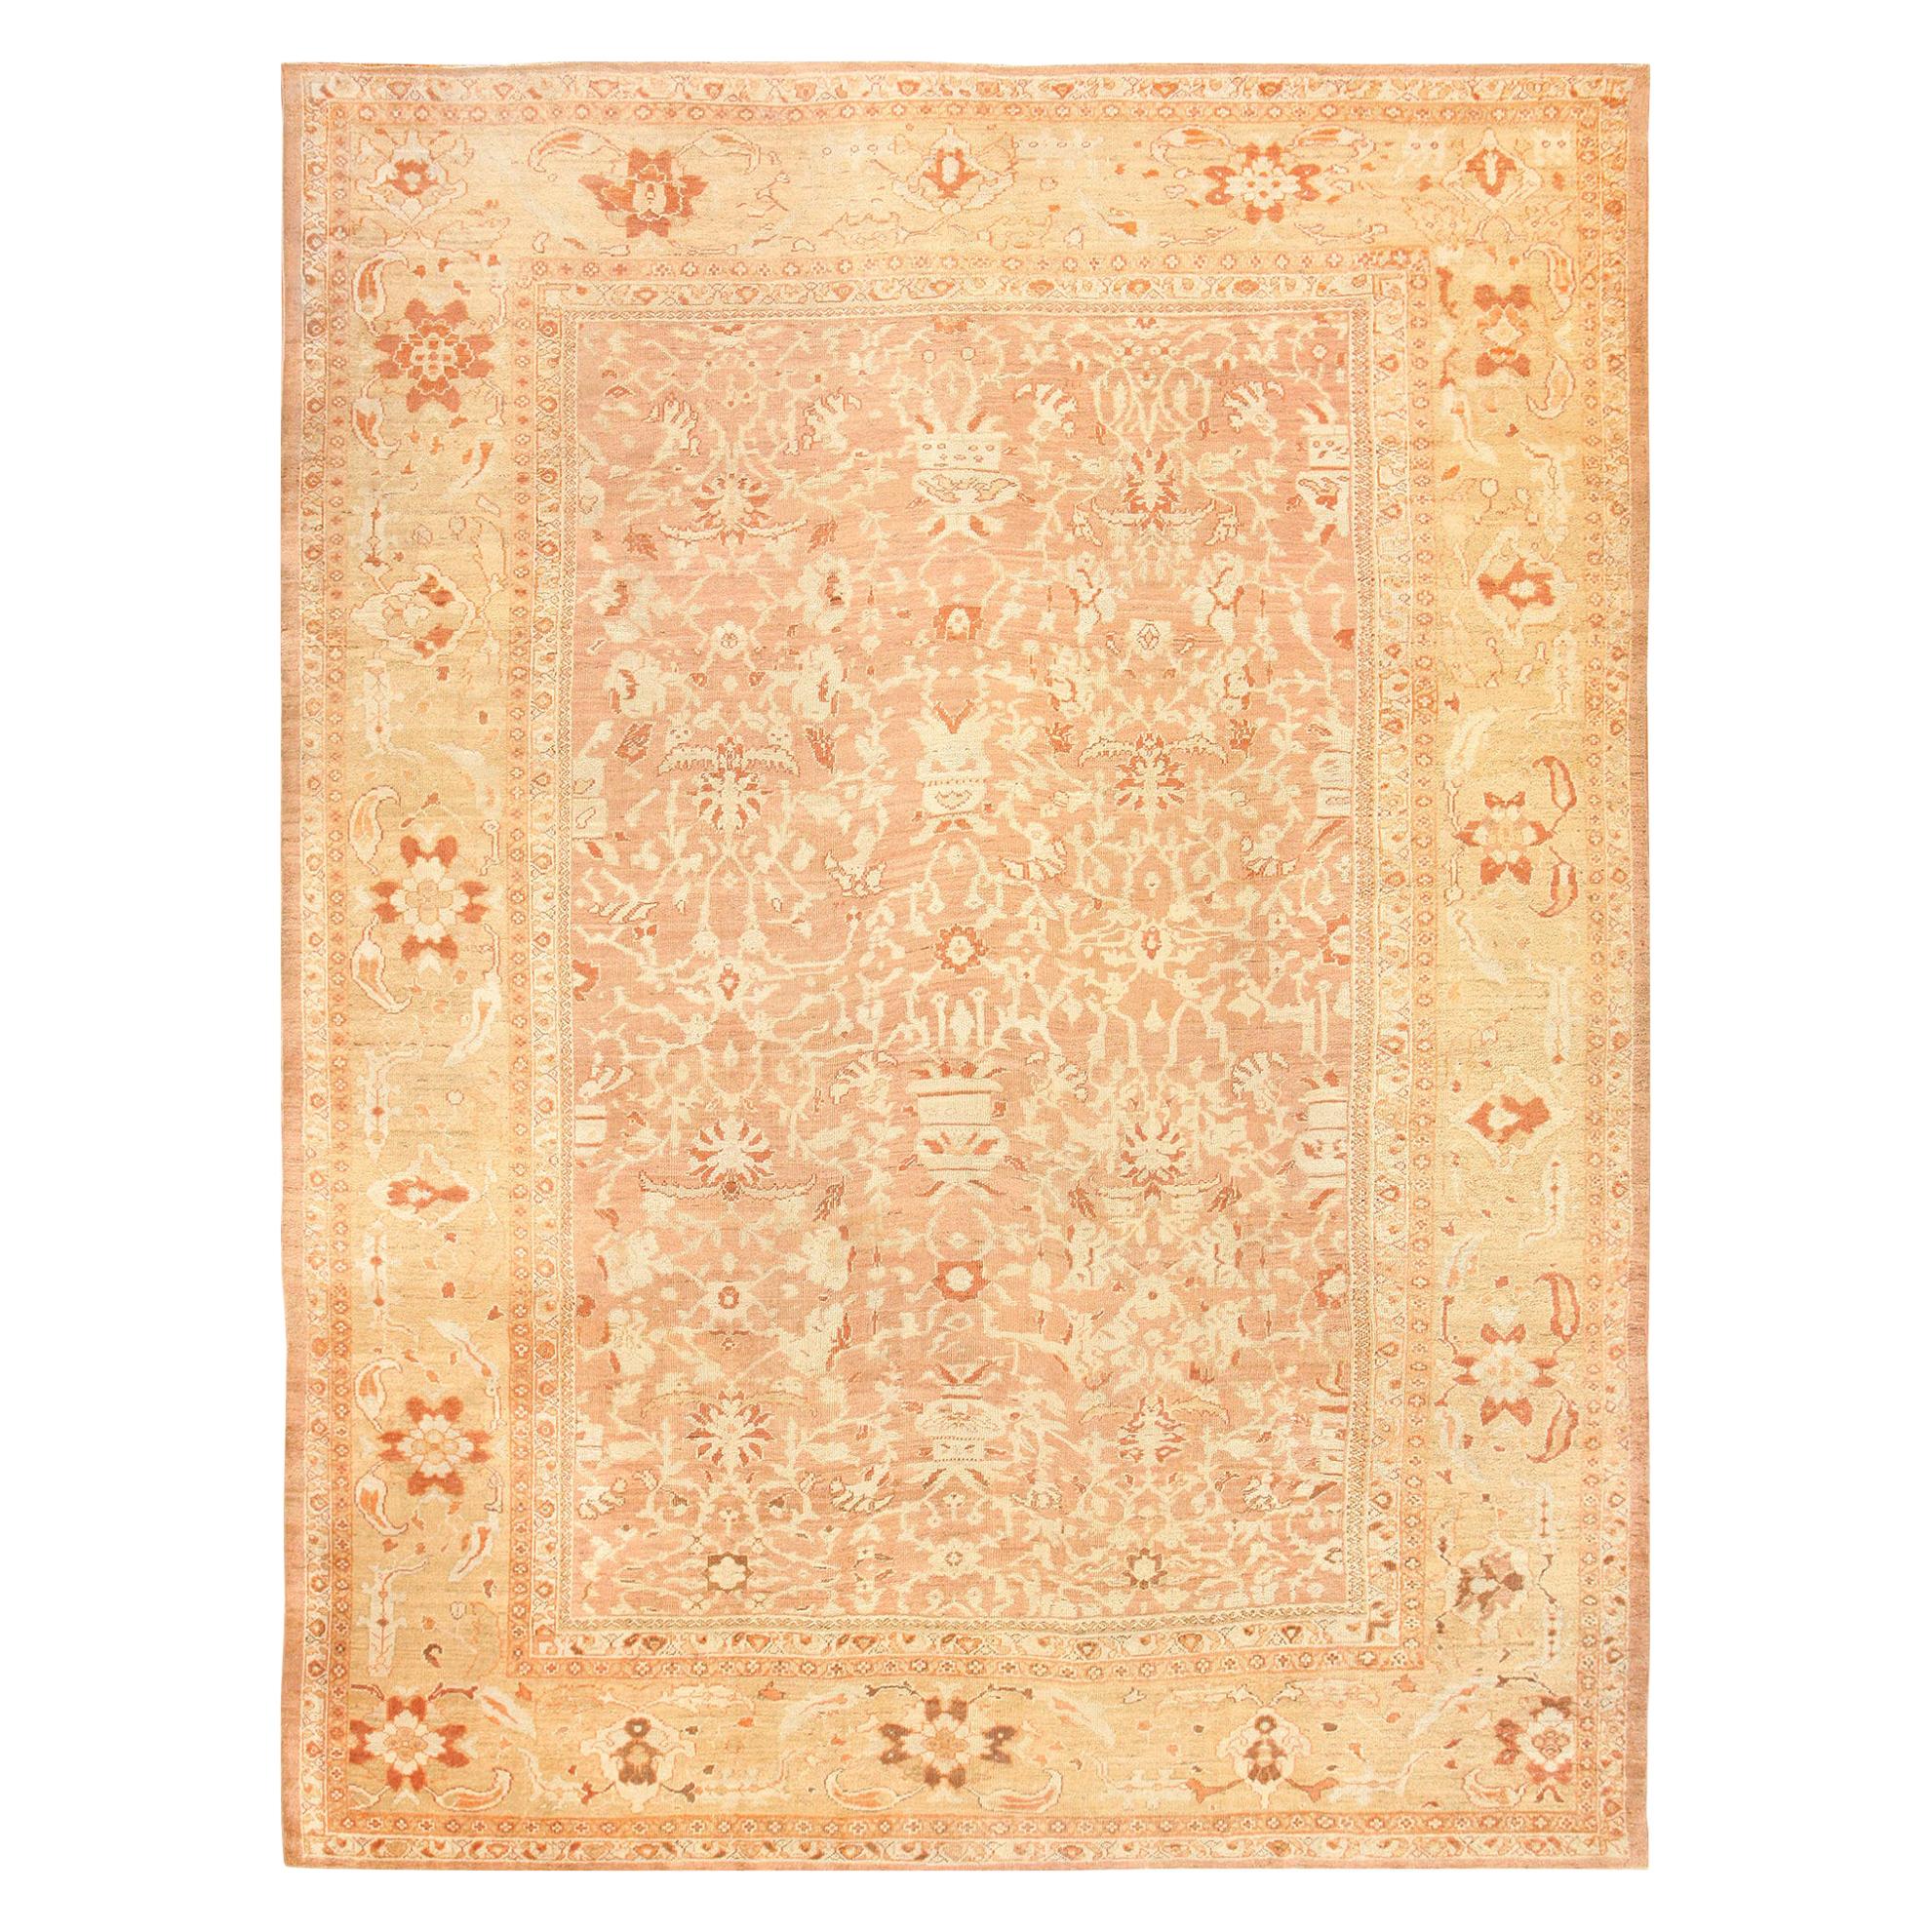 Decorative Antique Persian Ziegler Sultanabad Rug. Size: 11 ft x 15 ft For Sale